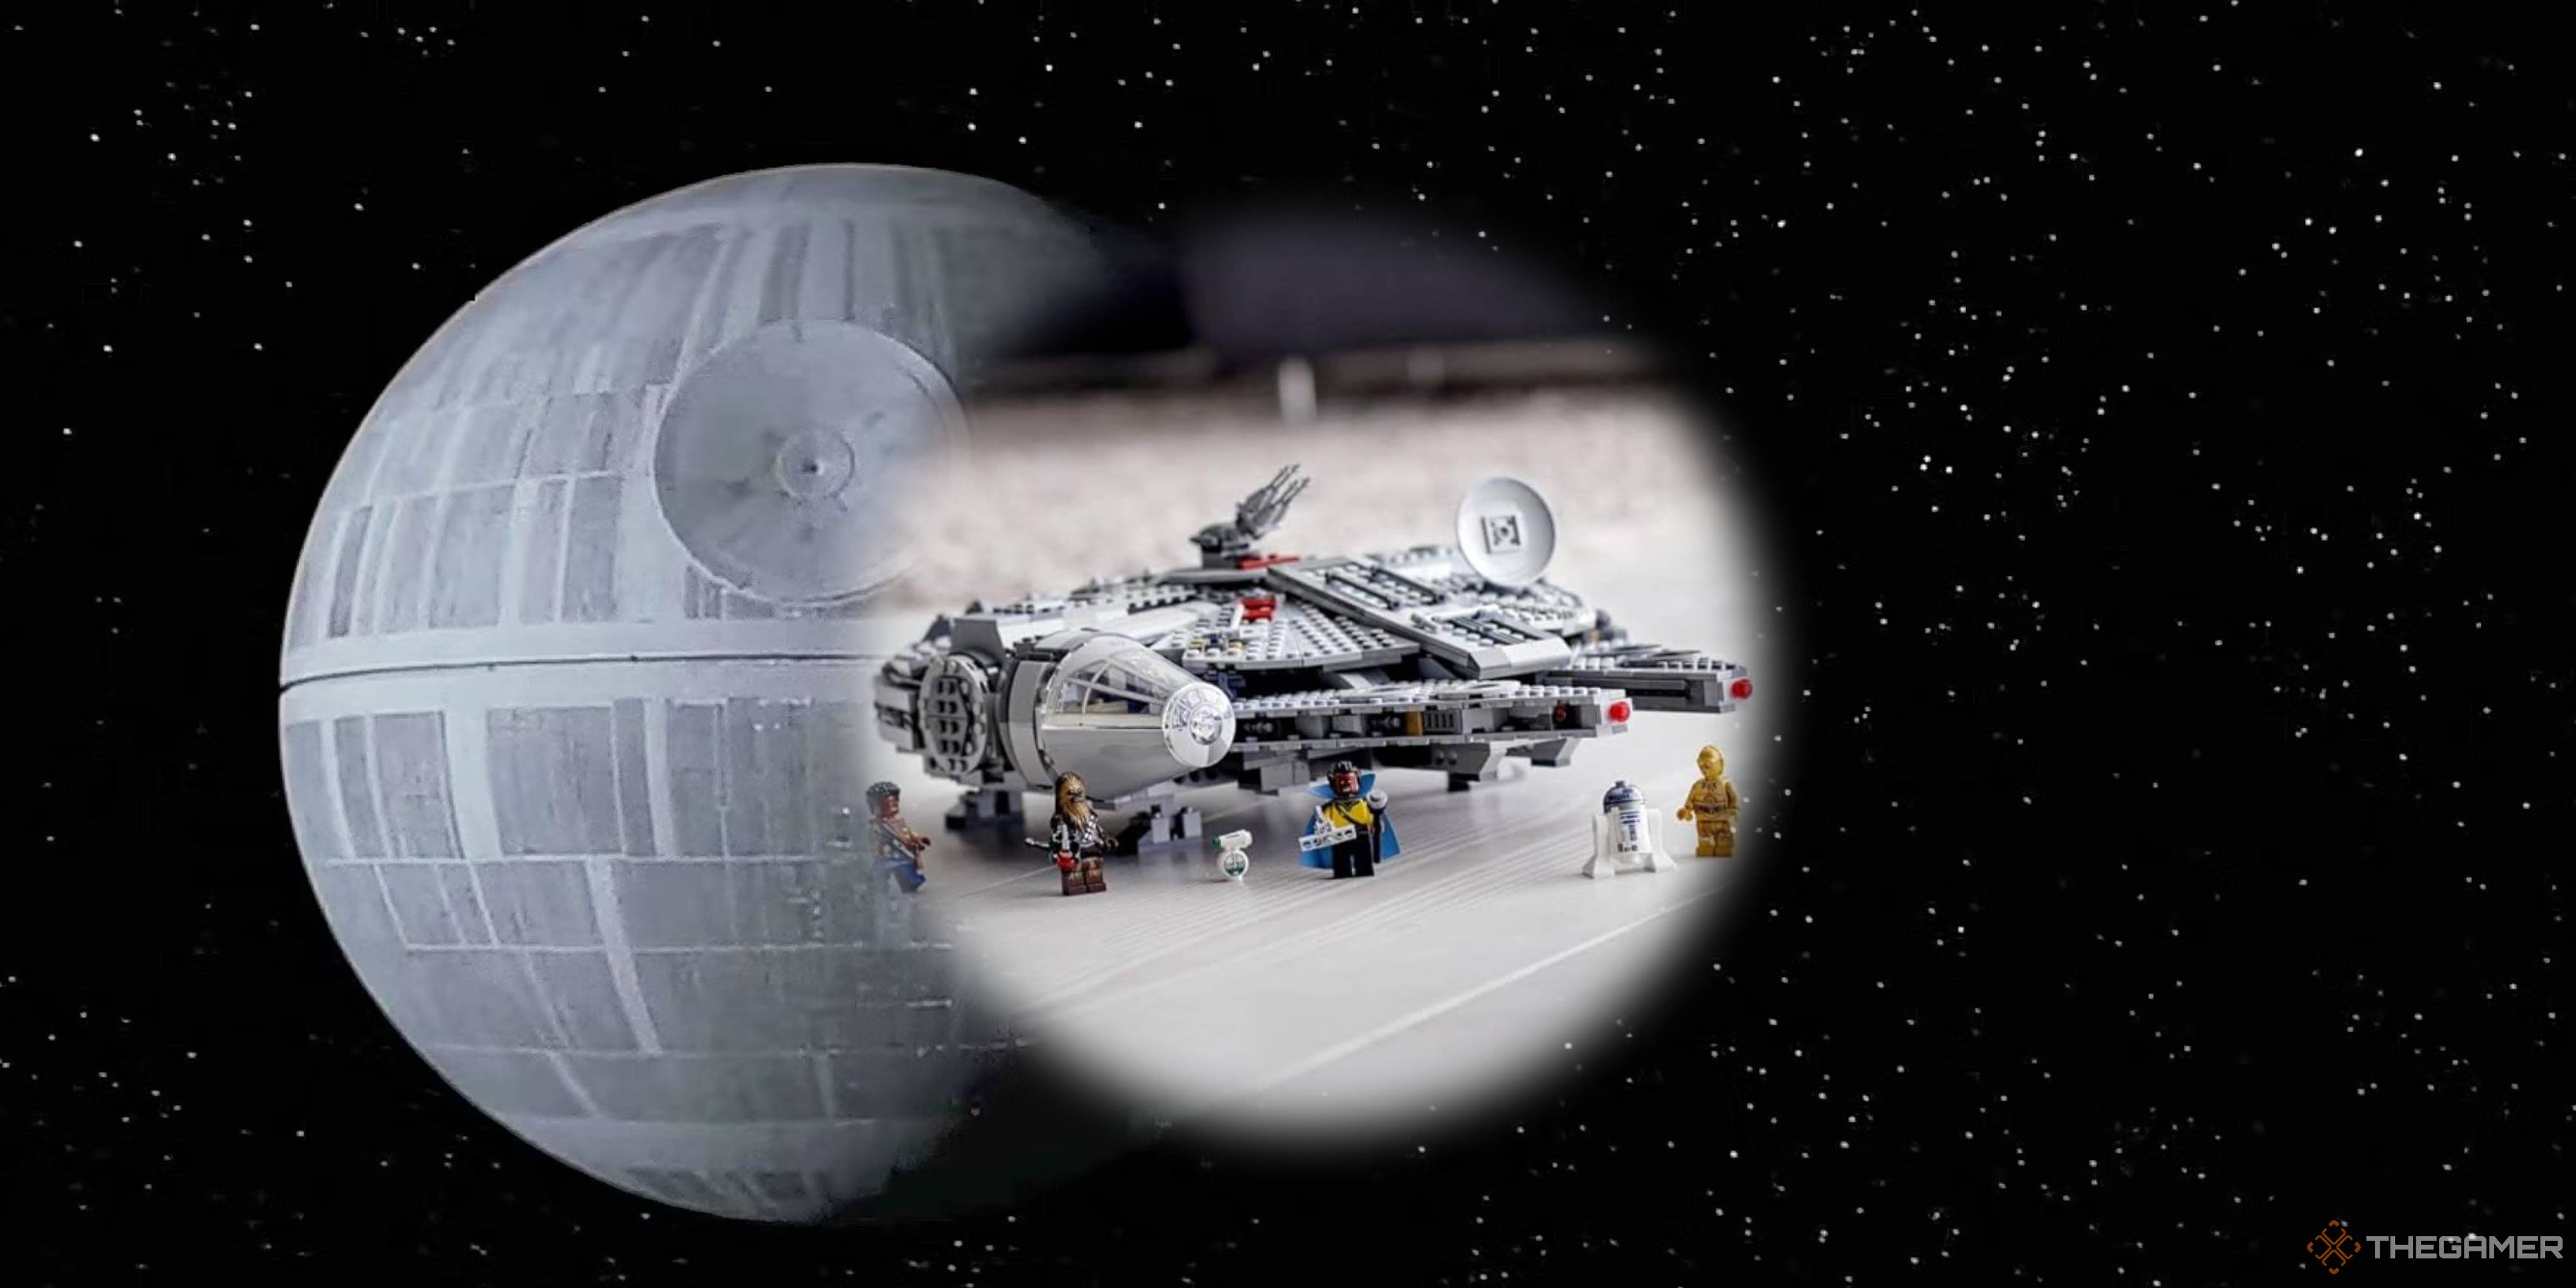 Celebrate Star Wars Day By Pikcing Up This Discounted Millennium Falcon Lego Set